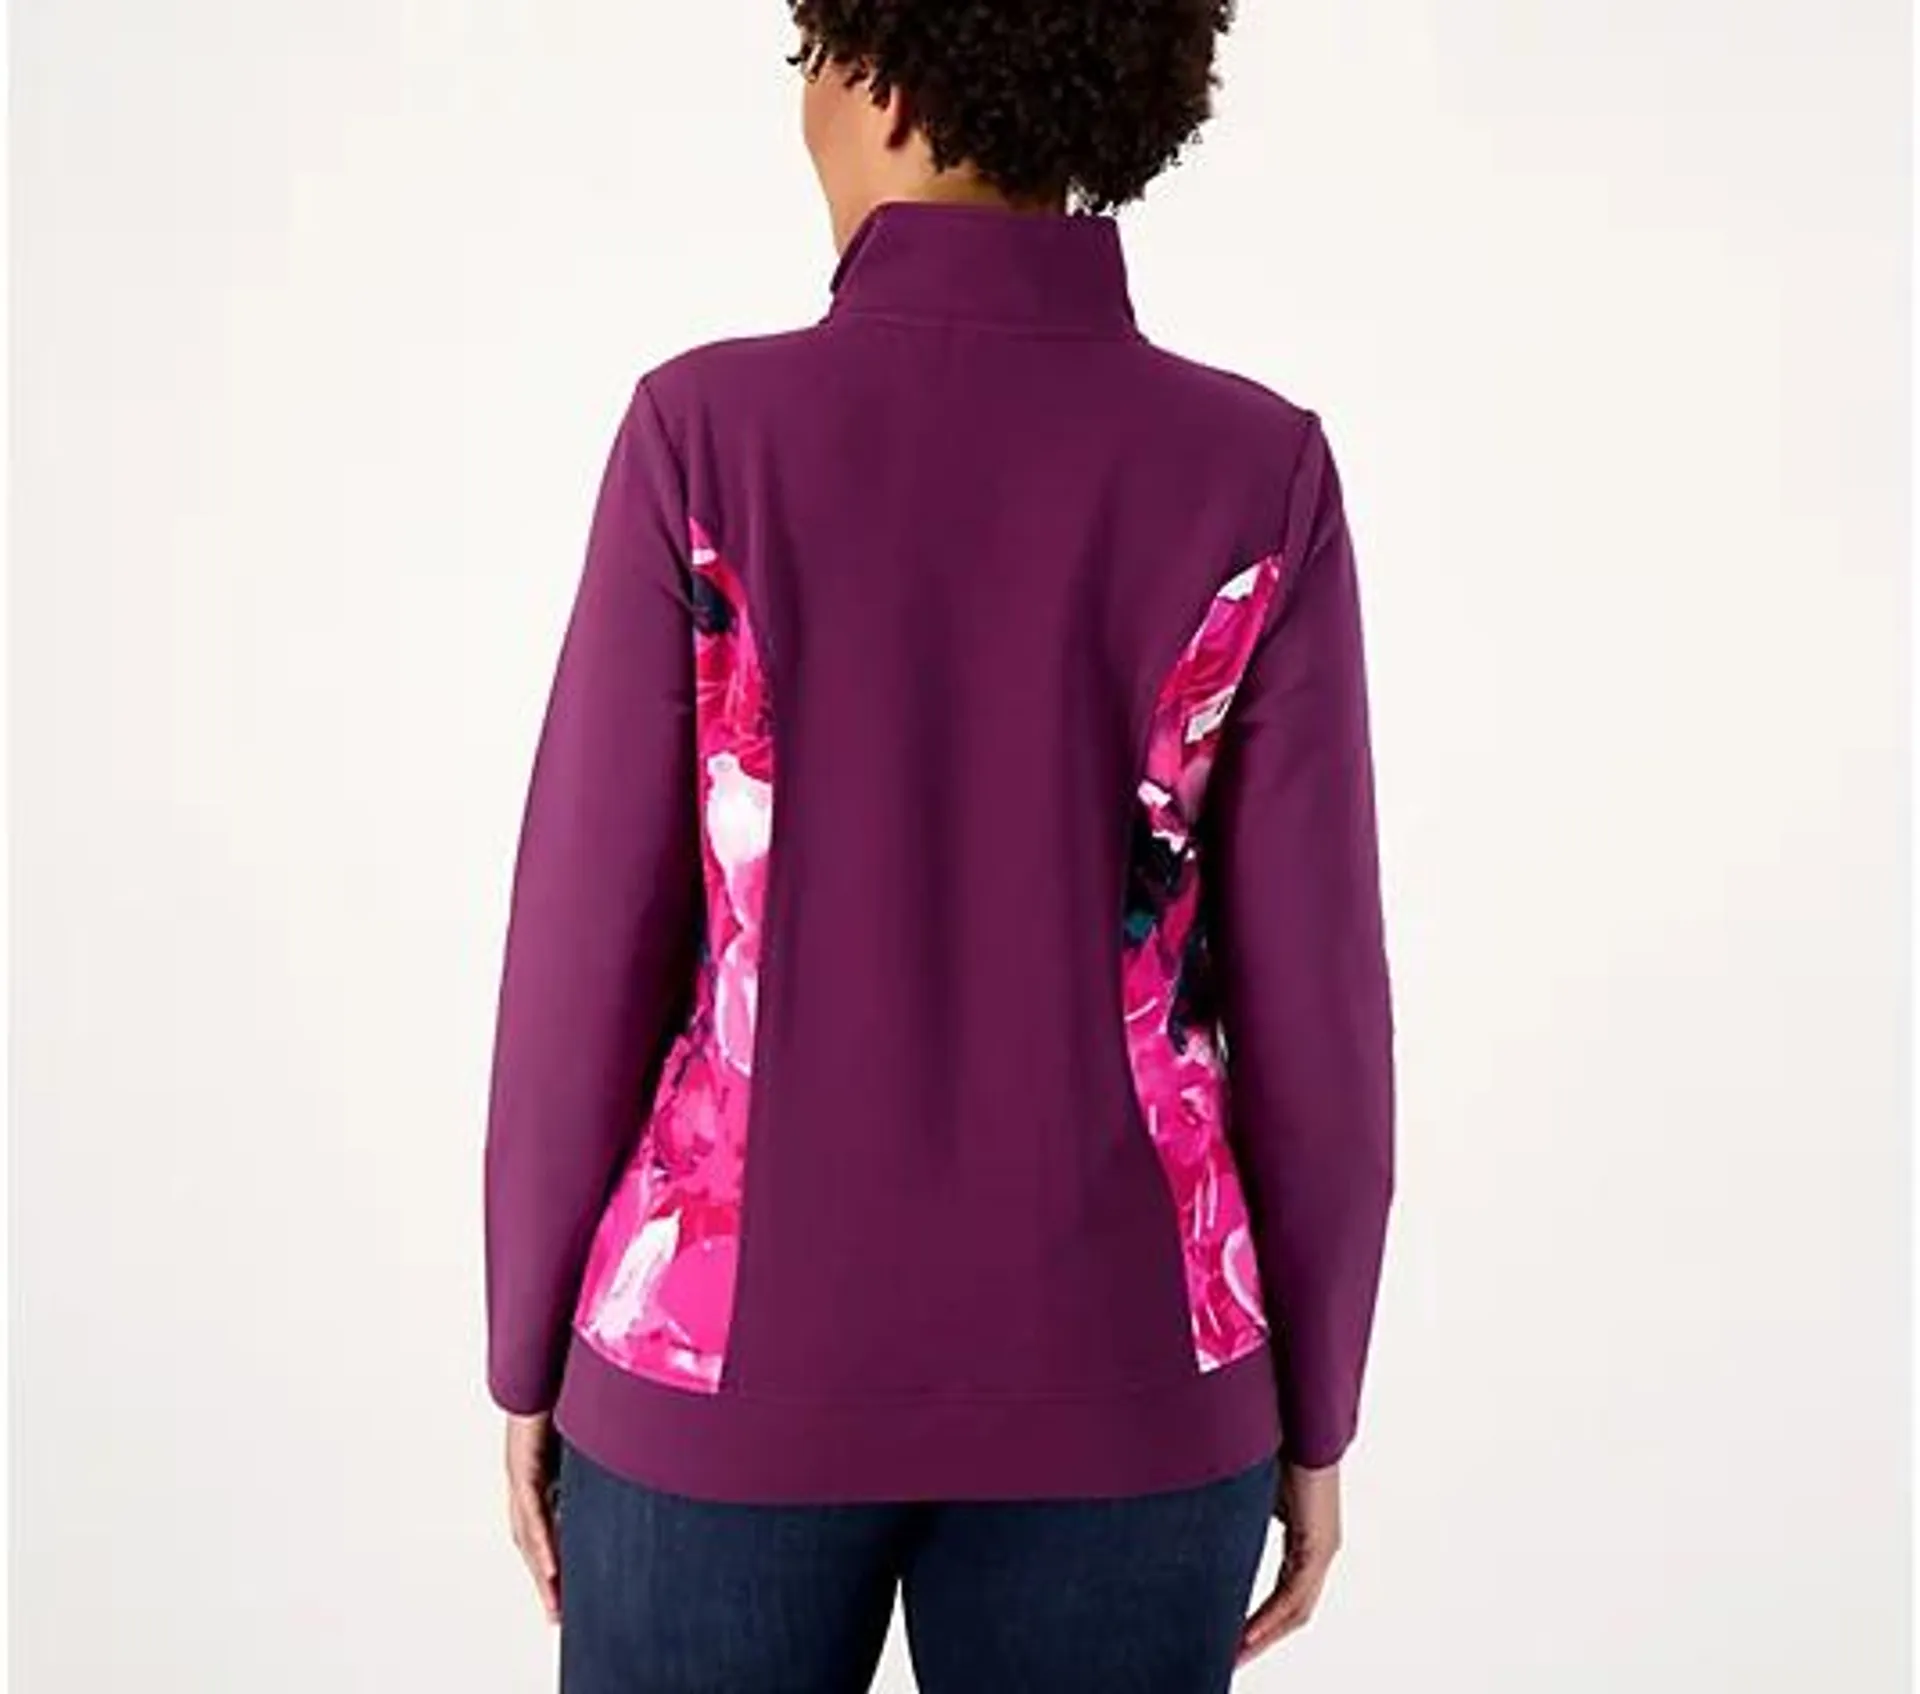 Sport Savvy French Terry Jacket with Printed Panels